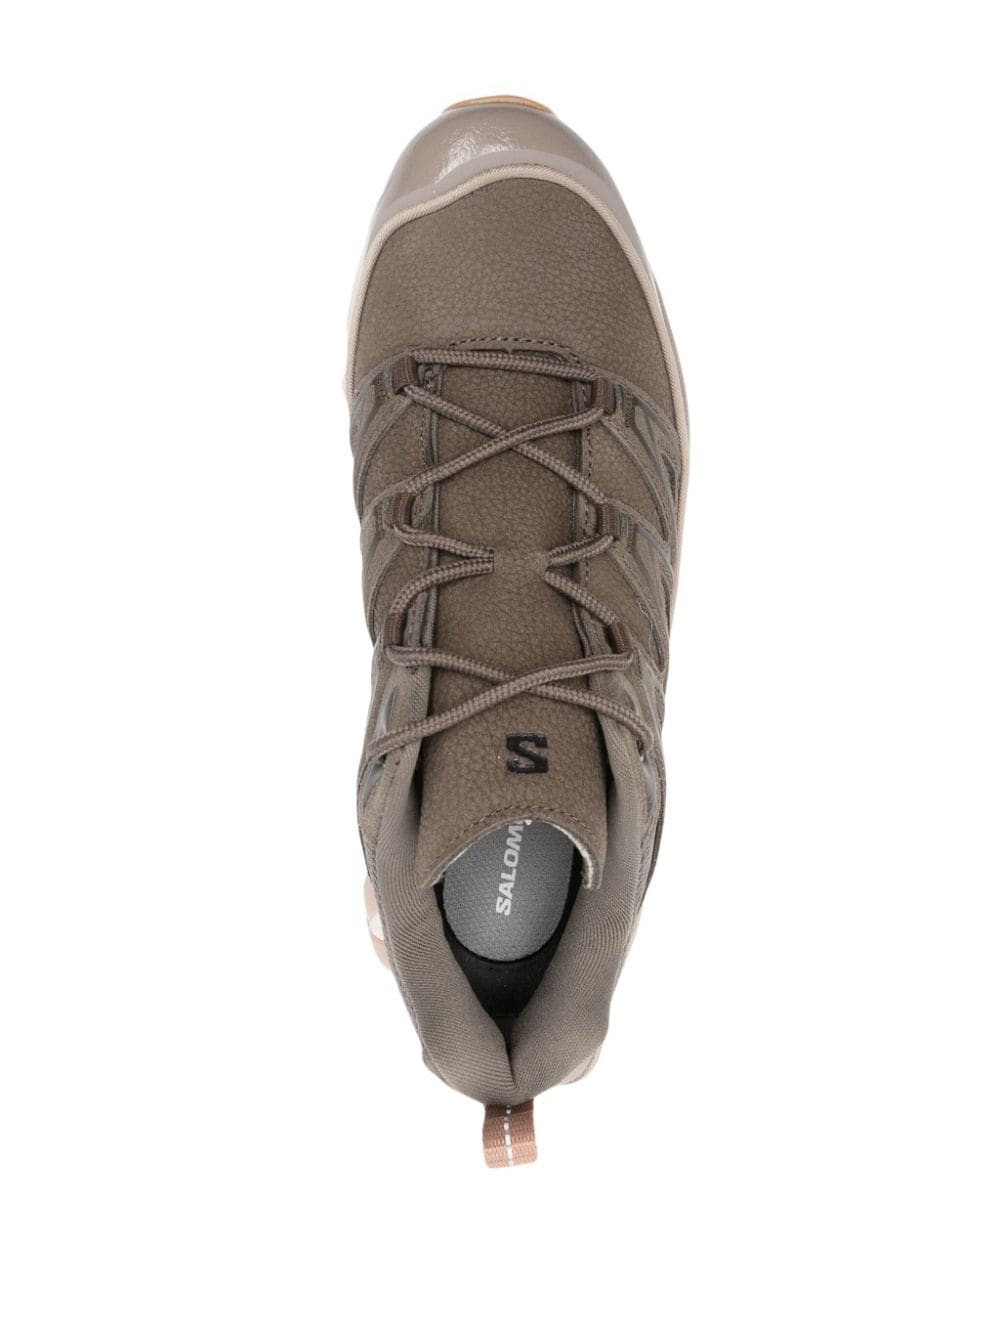 XT-6 Expanse leather sneakers<BR/><BR/><BR/>